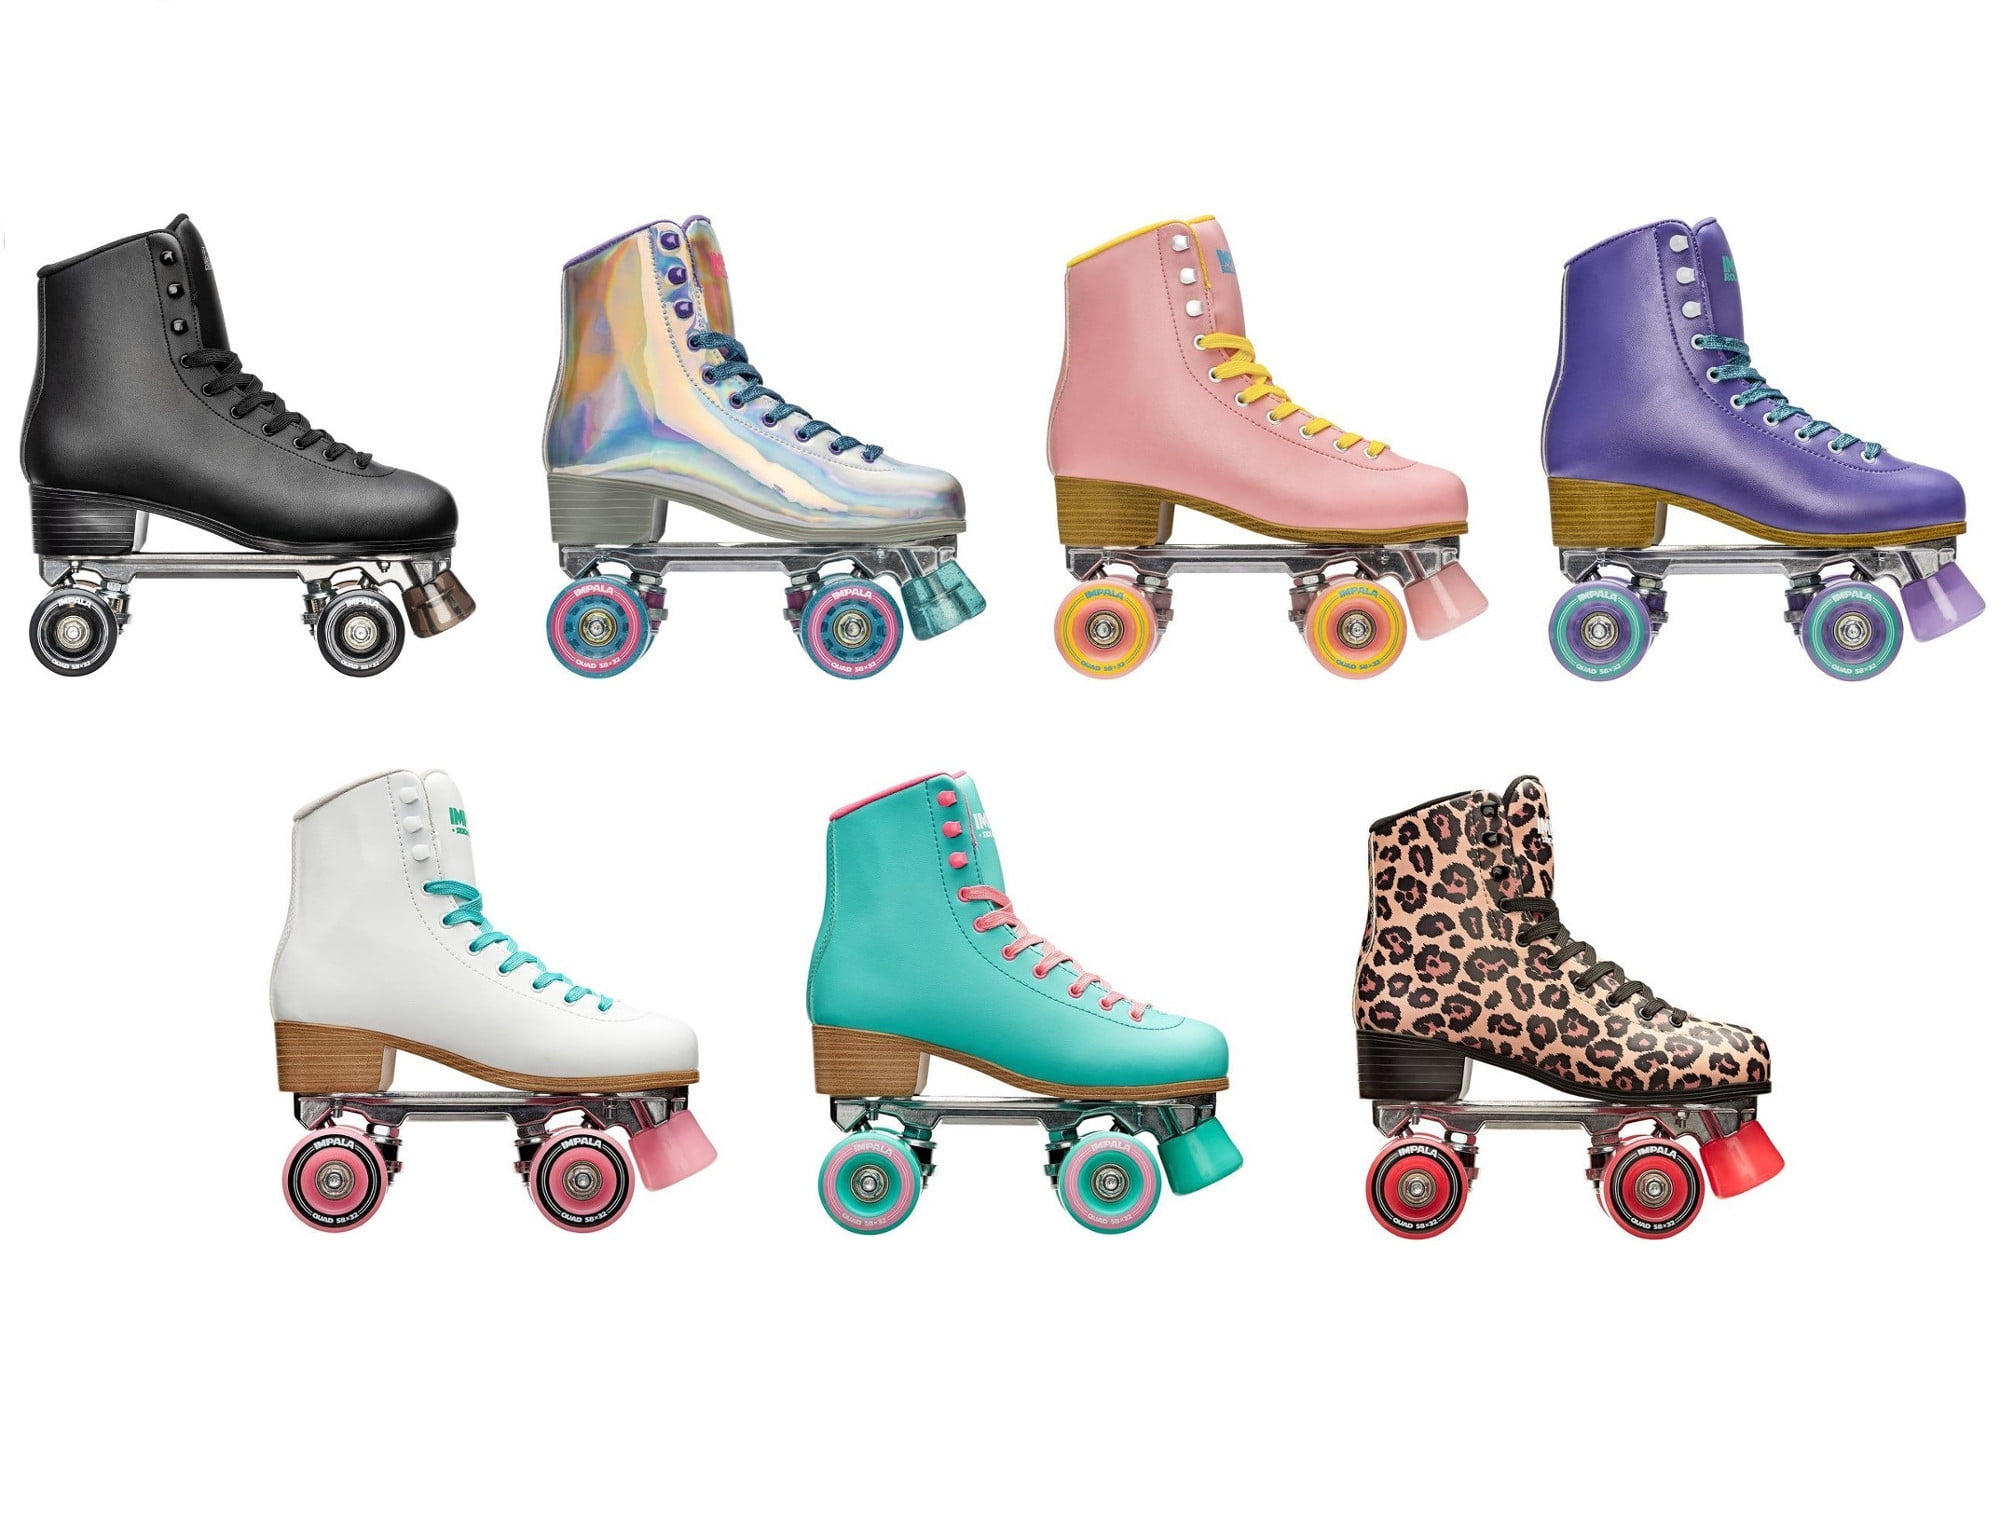 Details about   IMPALA Quad Roller Skates Vegan Holographic US Size 6 Brand New In Hand 